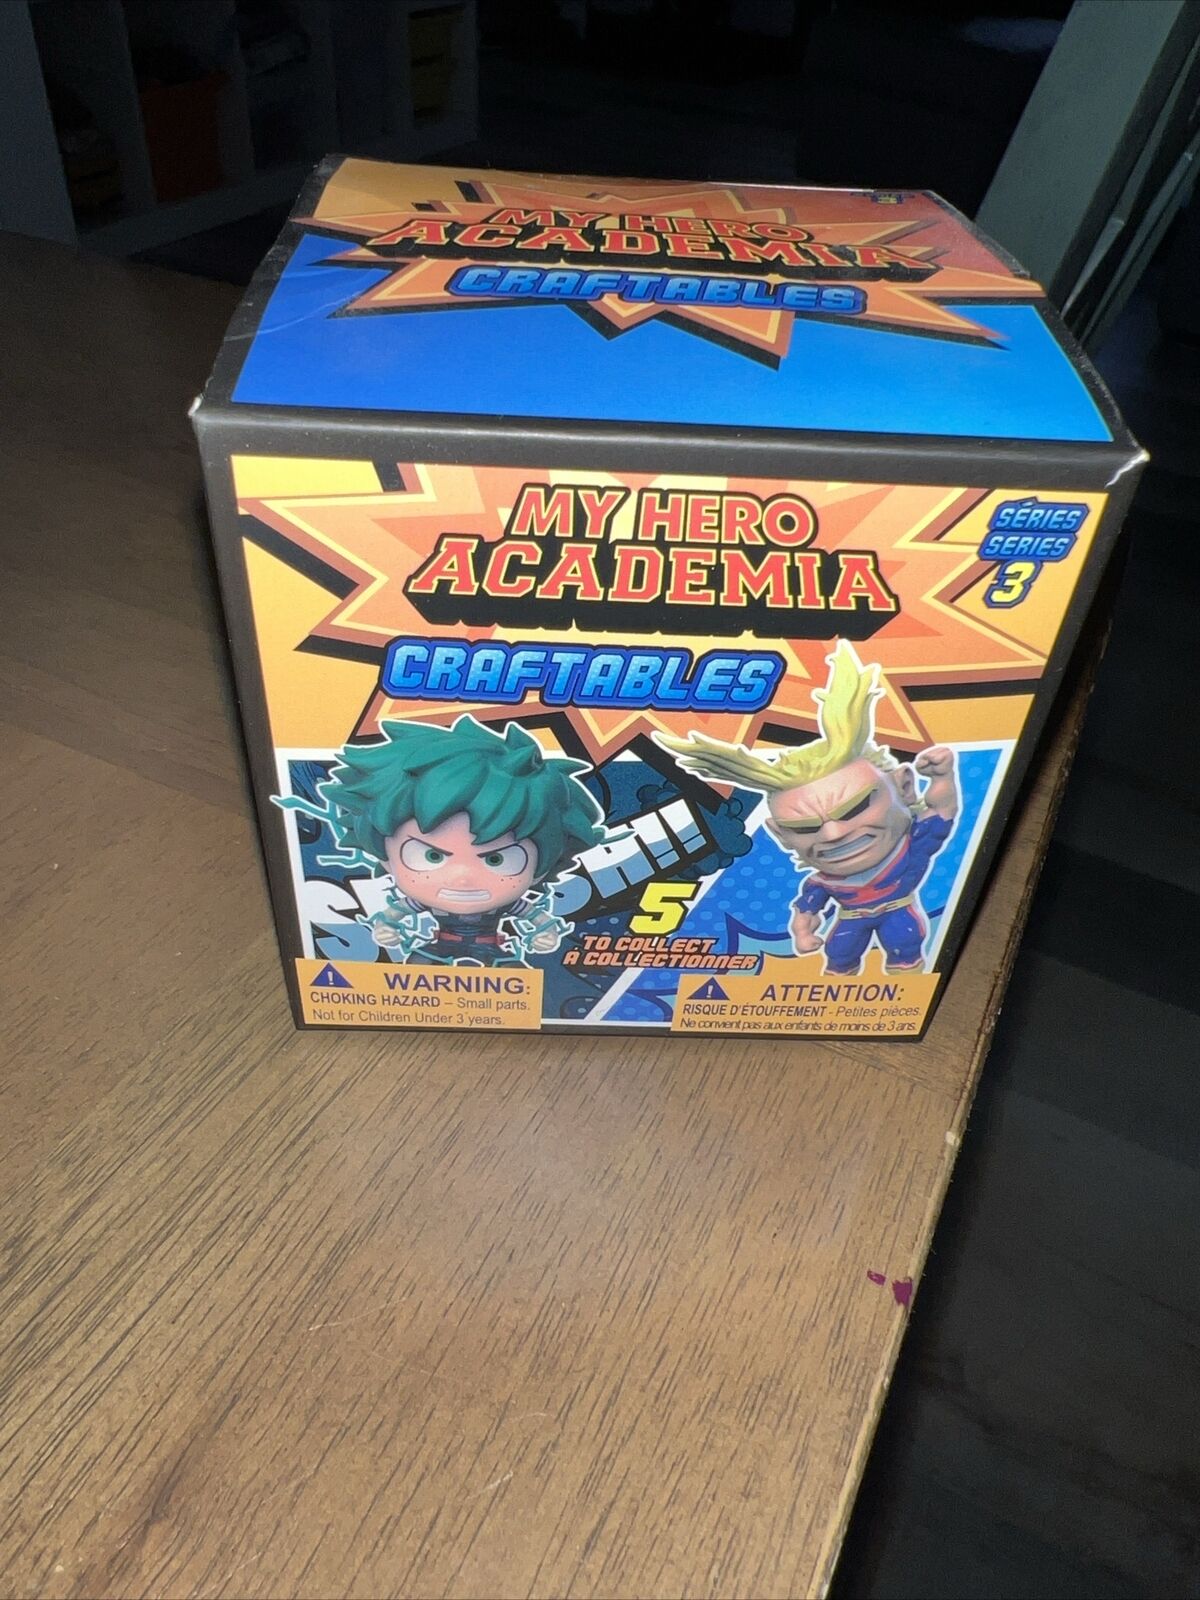 My Hero Academia Craftables Buildable Action Figure - Series 3 - Brand New#